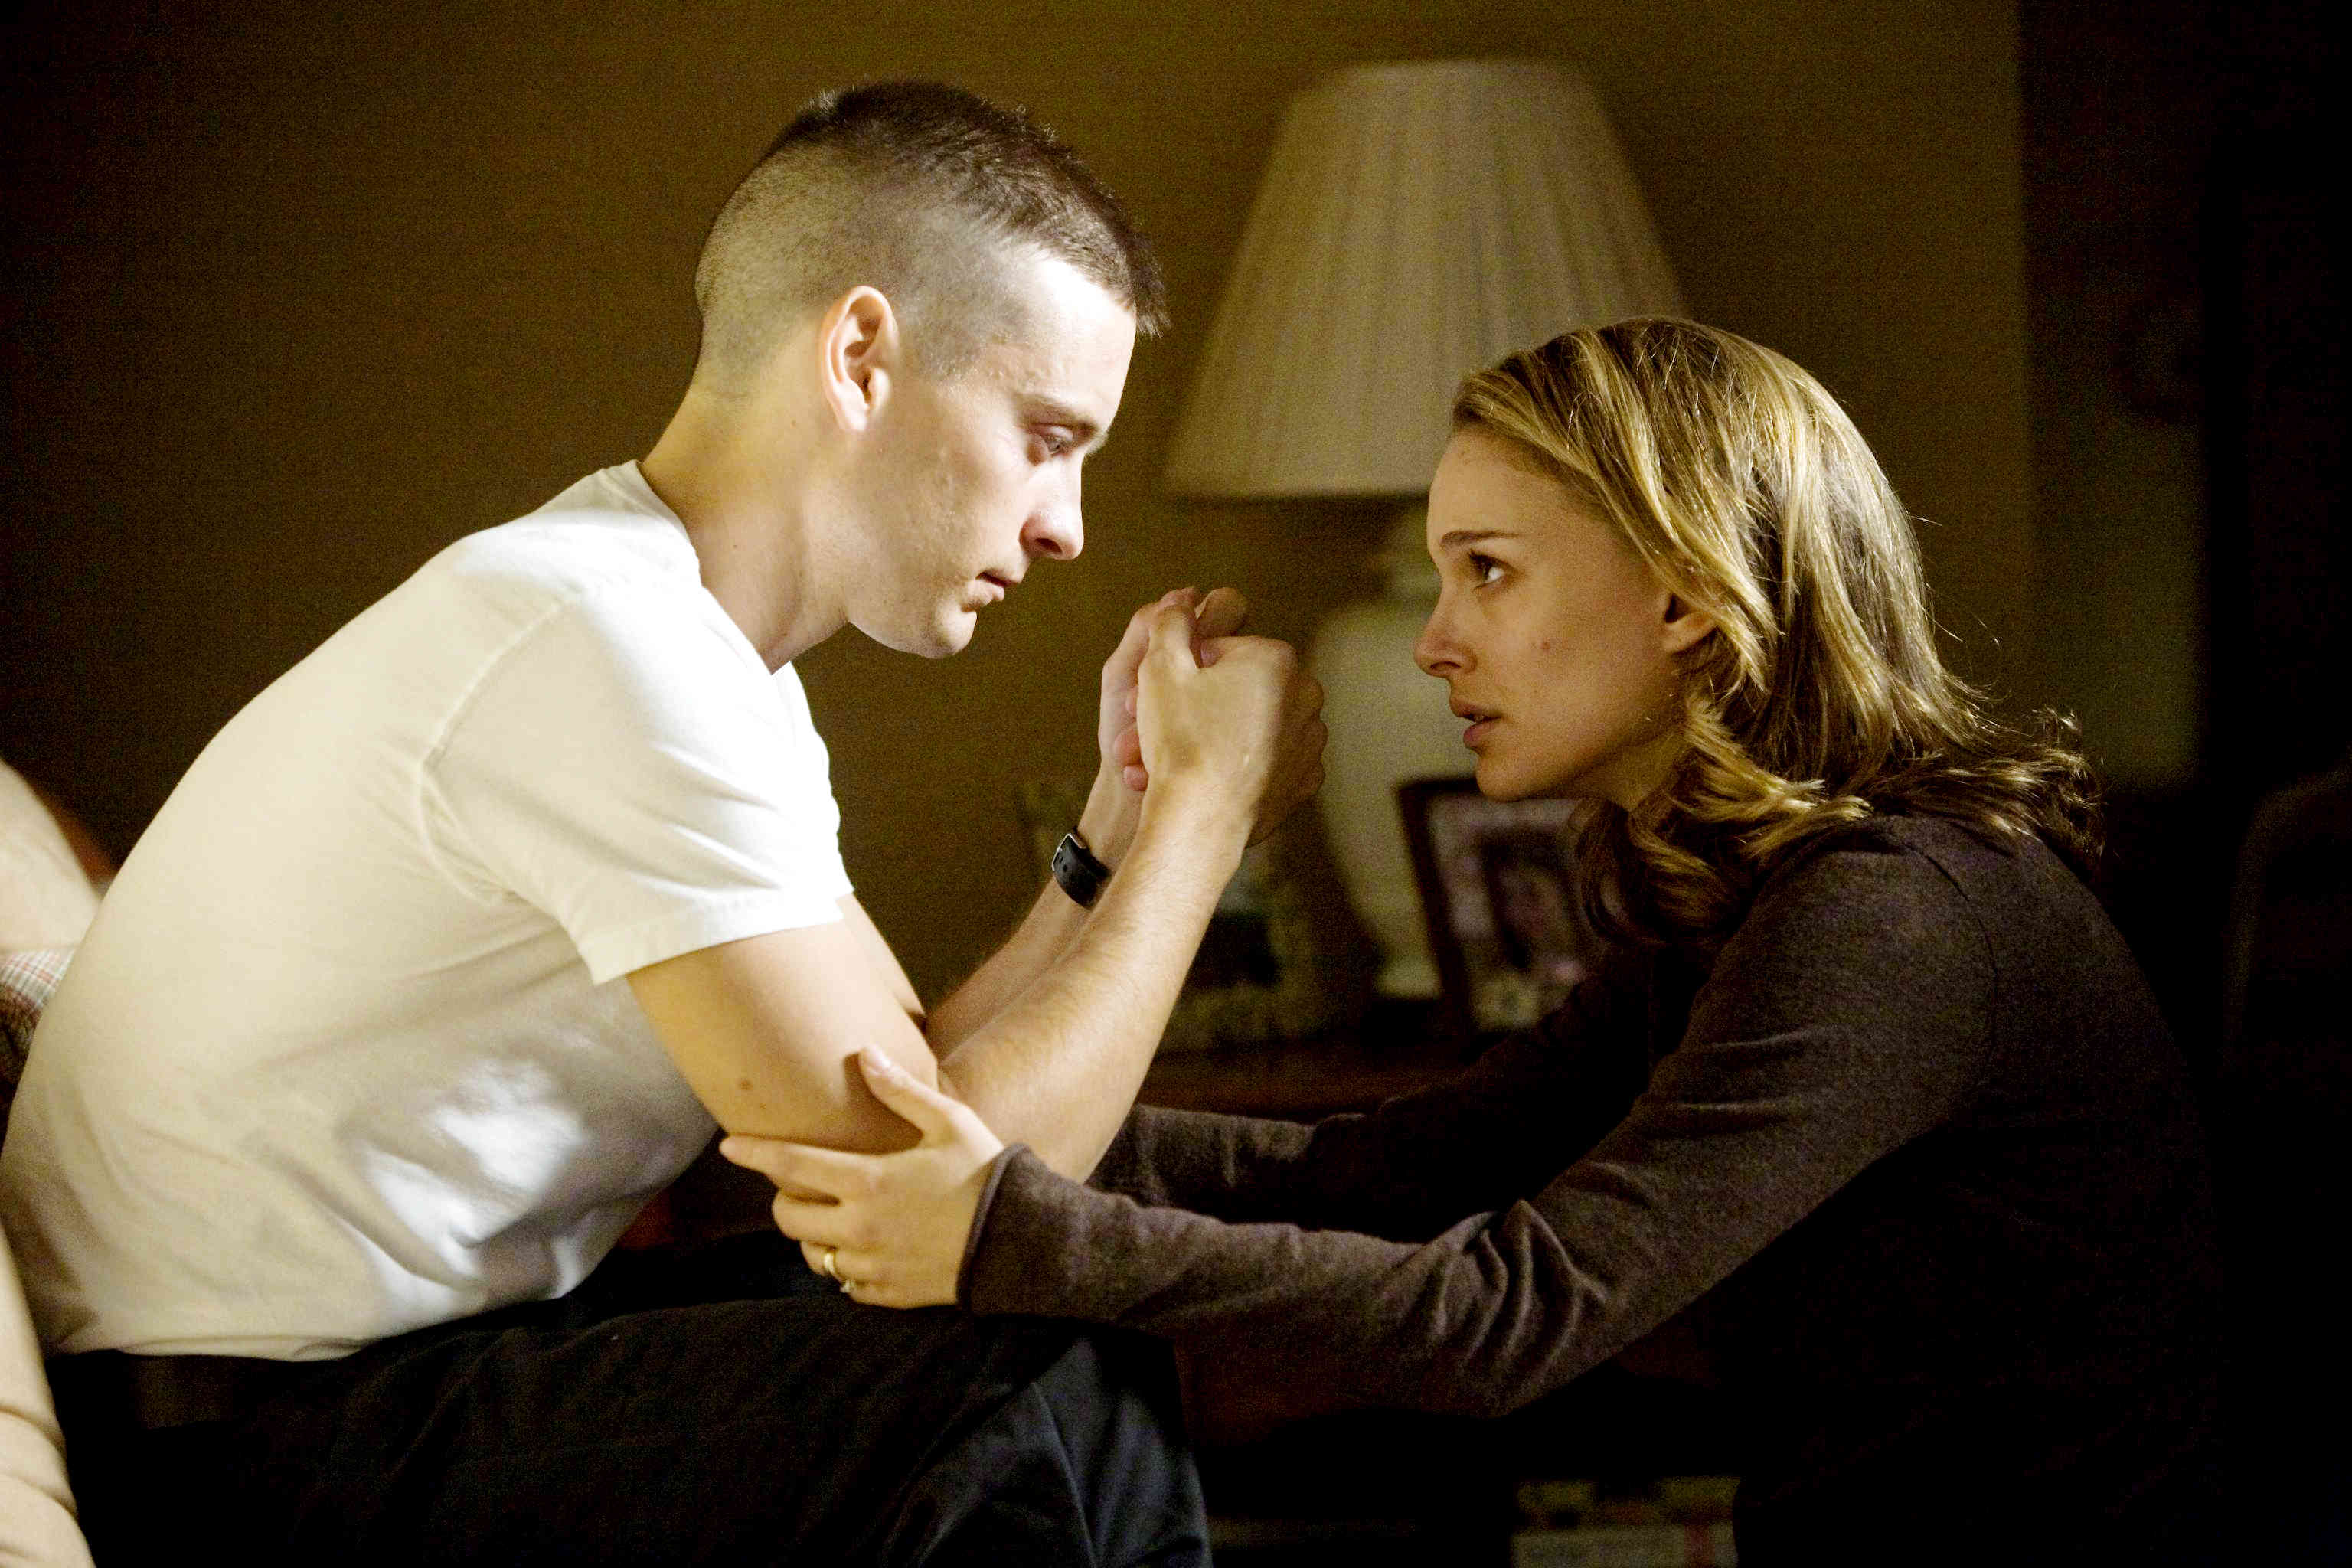 Tobey Maguire stars as Sam Cahill and Natalie Portman stars as Grace Cahill in Lionsgate Films' Brothers (2009)